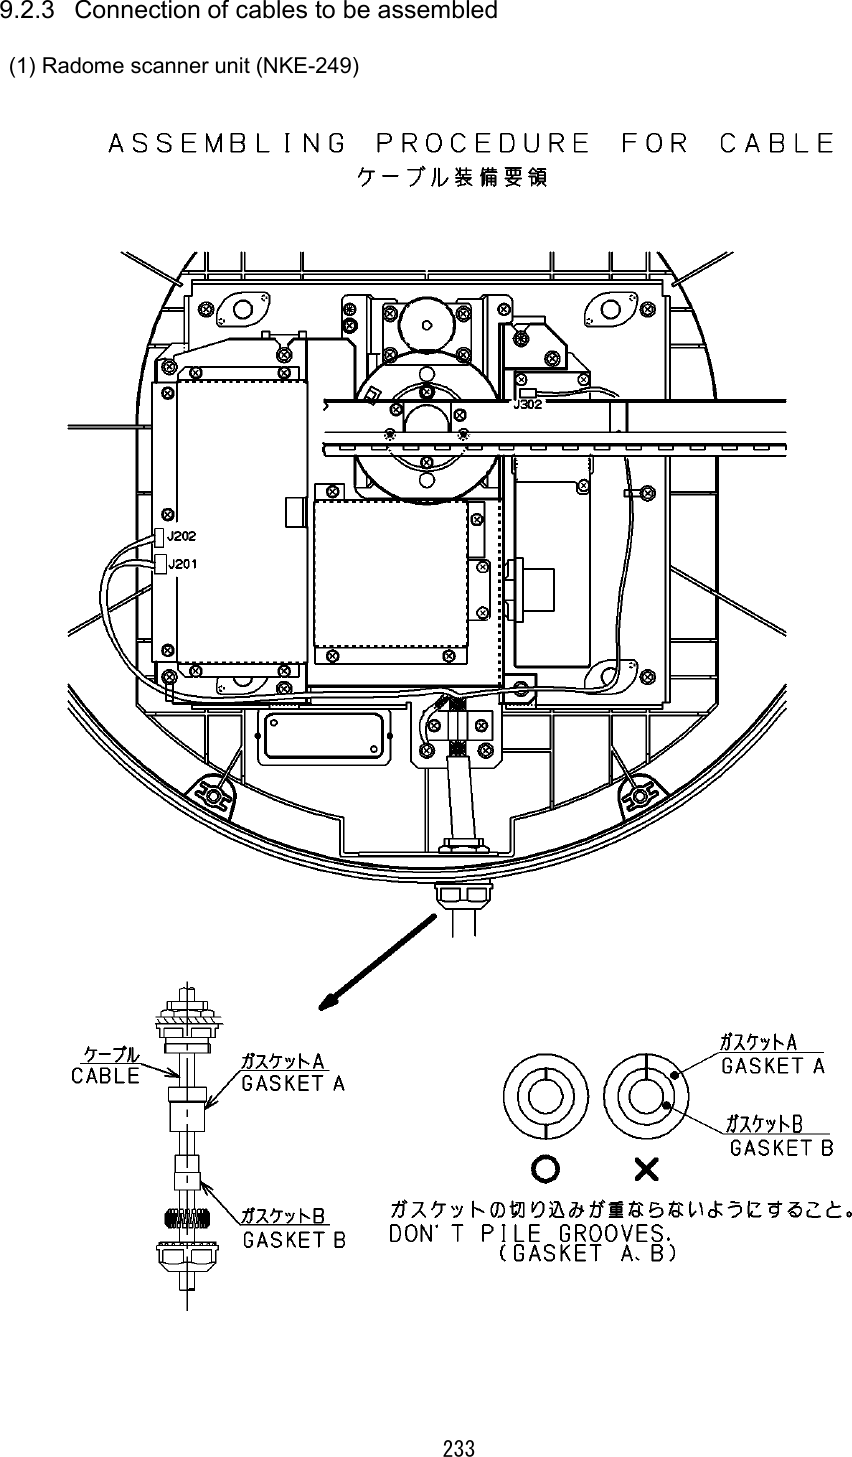 233 9.2.3  Connection of cables to be assembled (1) Radome scanner unit (NKE-249)   